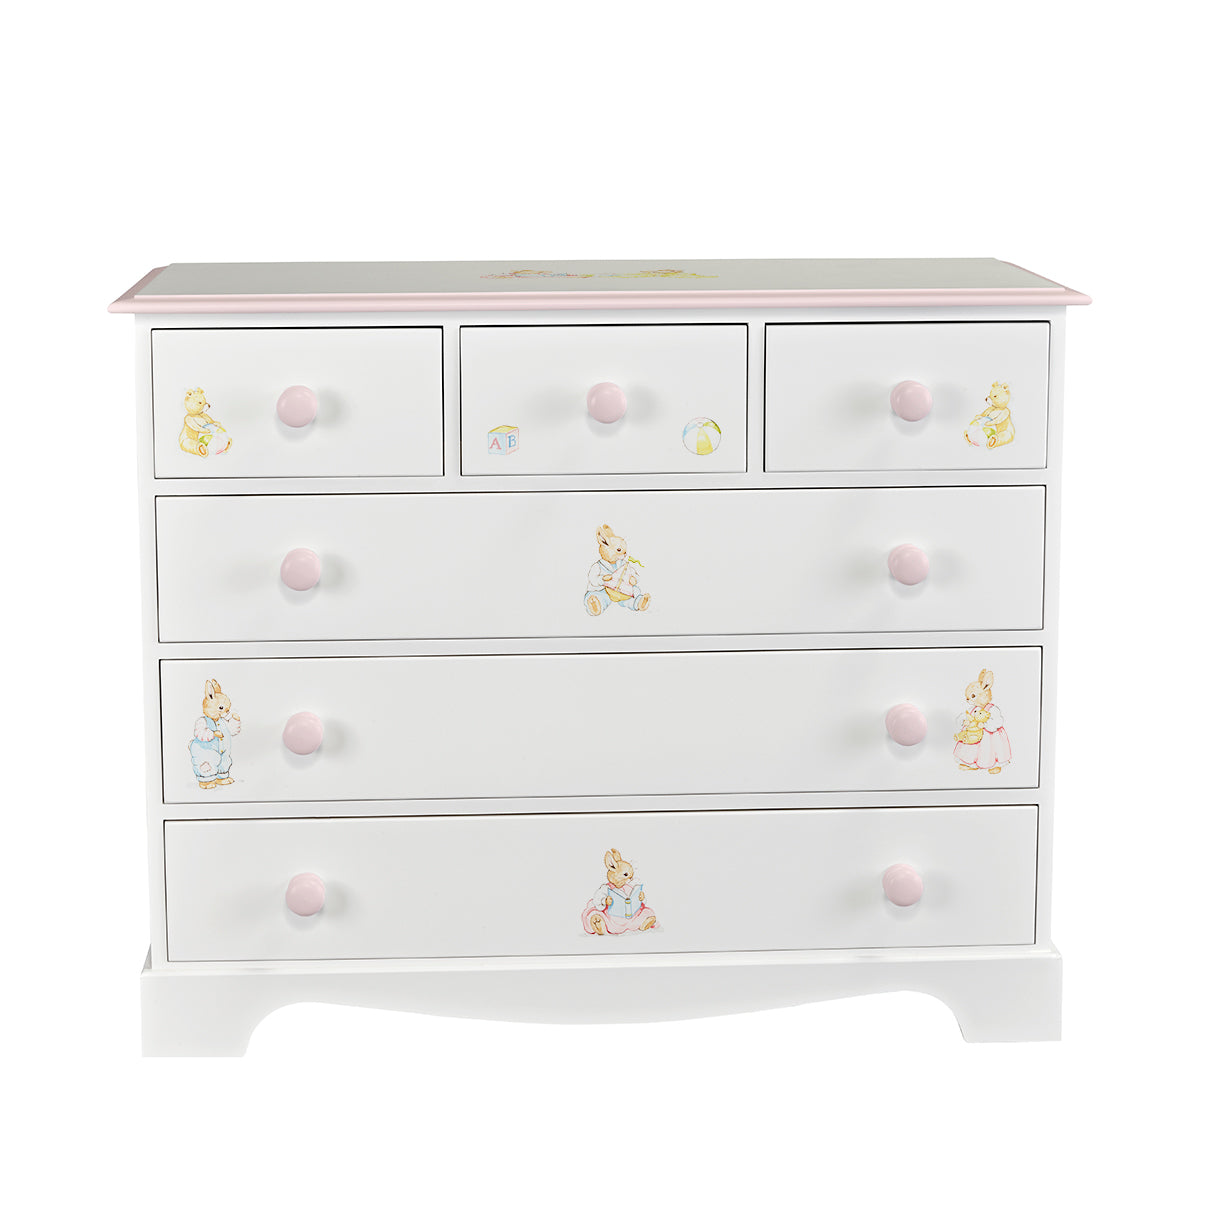 Extra Large Chest of Drawers - Barbara's Bunnies with Dragons Pink Trim